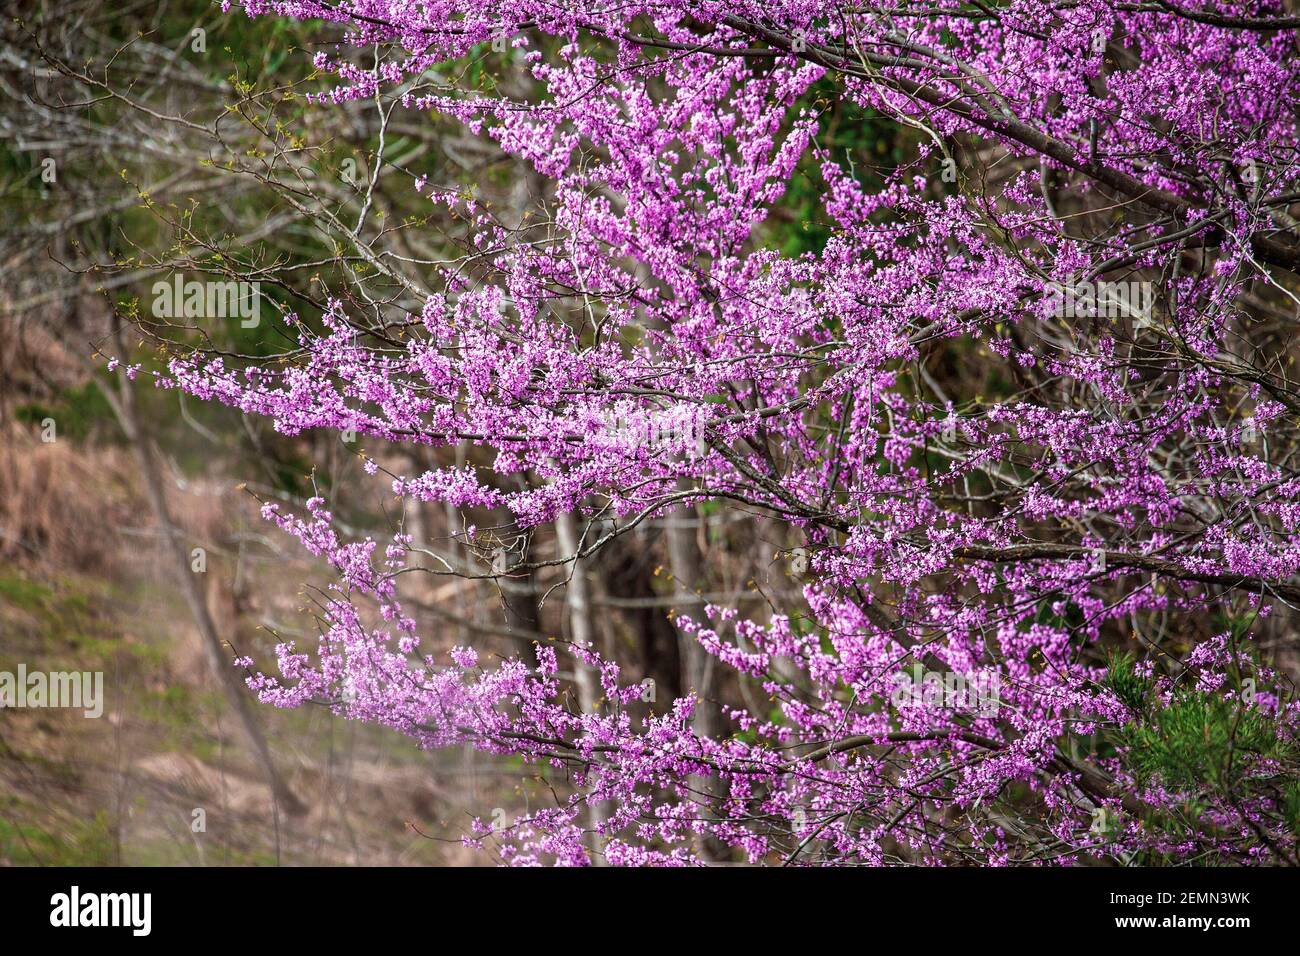 Eastern Redbud Tree, Cercis Canadensis, native to eastern North America shown here in full bloom in south central Kentucky. Shallow depth of field. Stock Photo